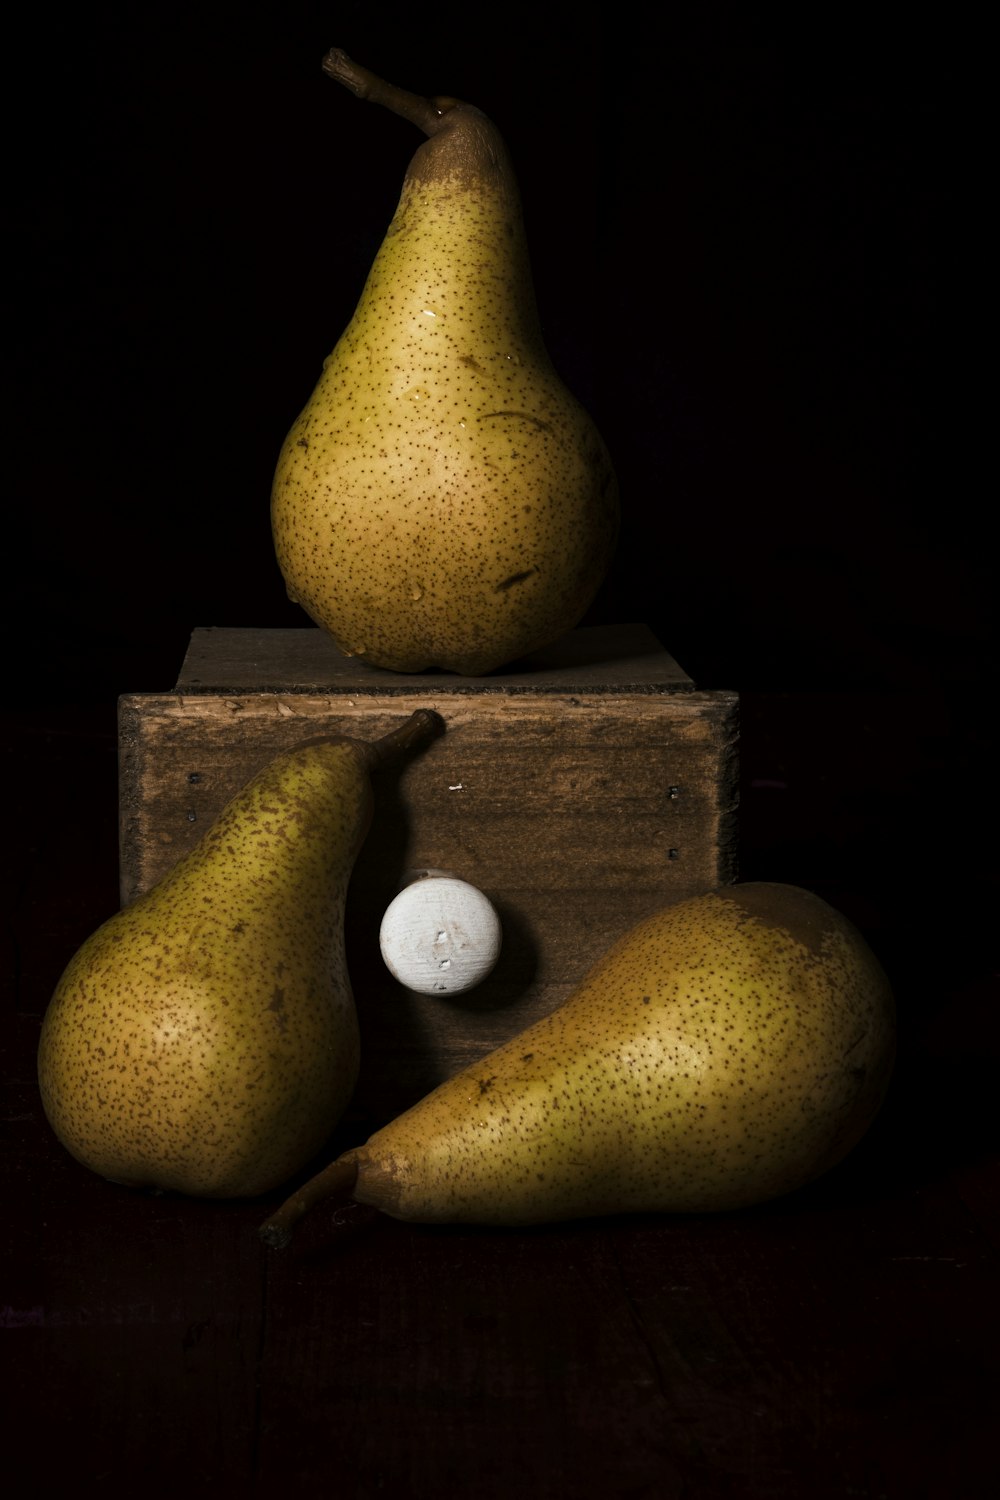 two yellow and white oval fruits on brown wooden box